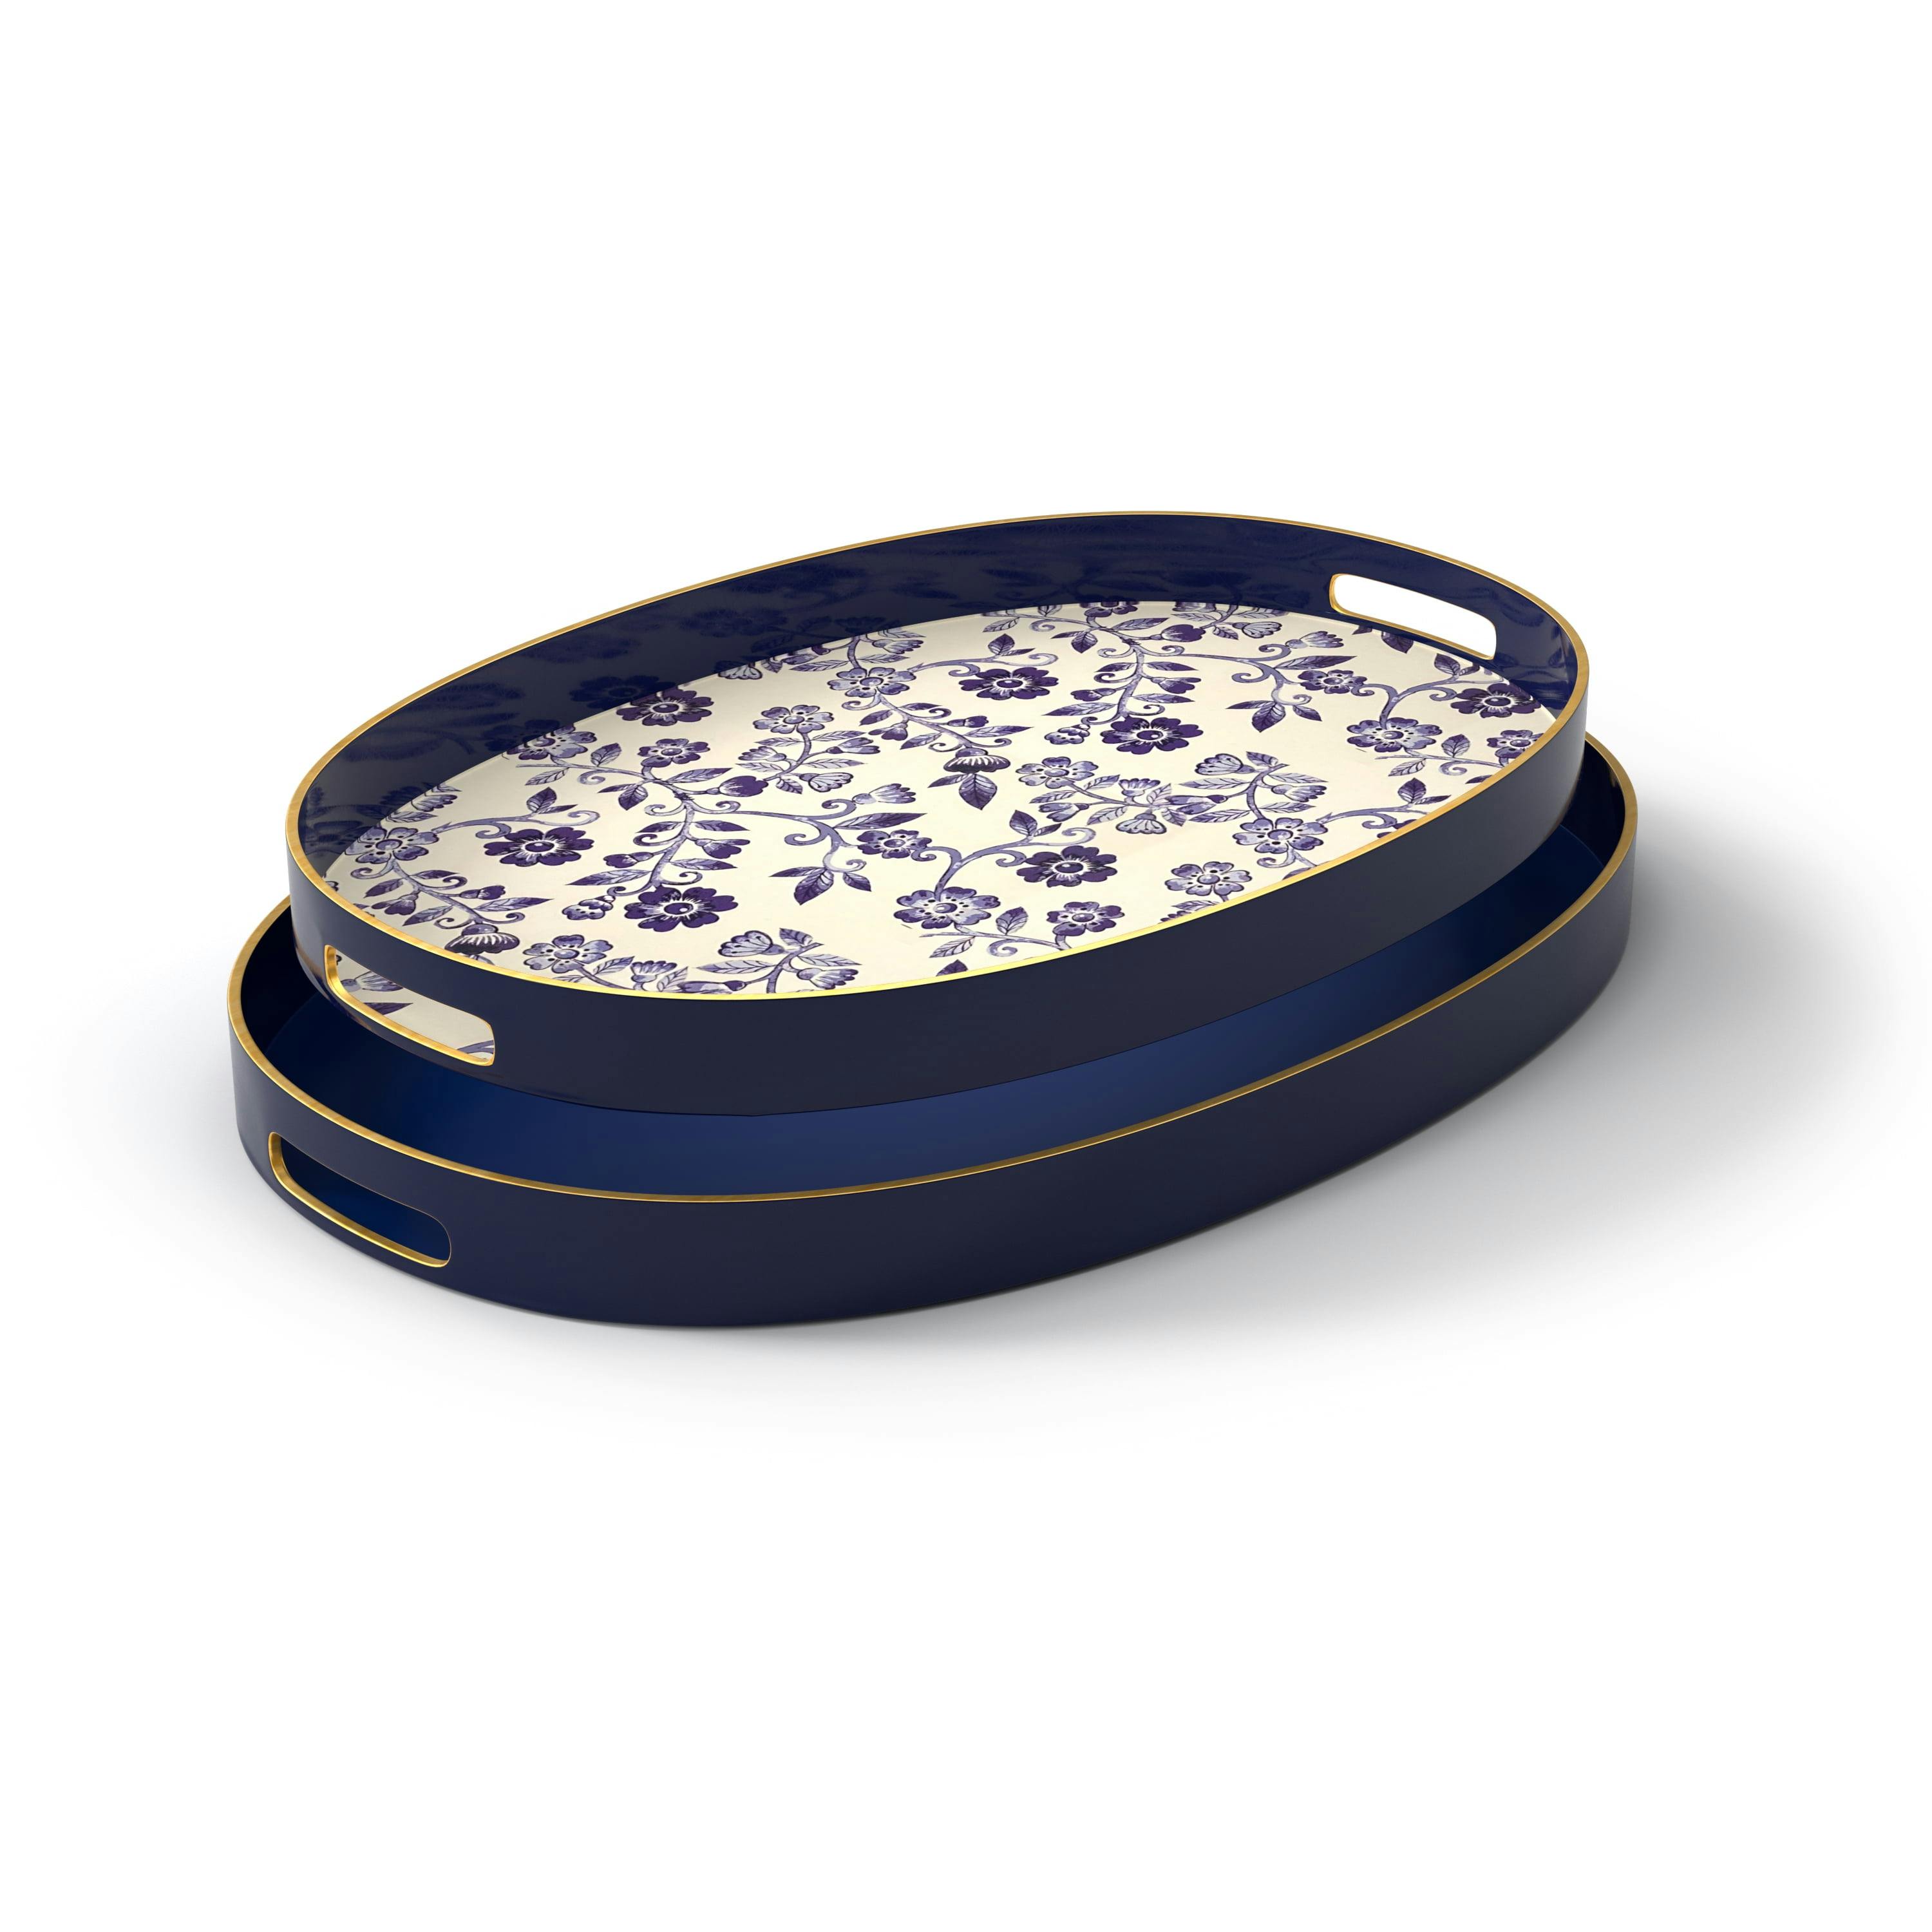 Elegant Blue and Floral Oval Serving Trays with Gold Rim, 2-Piece Set